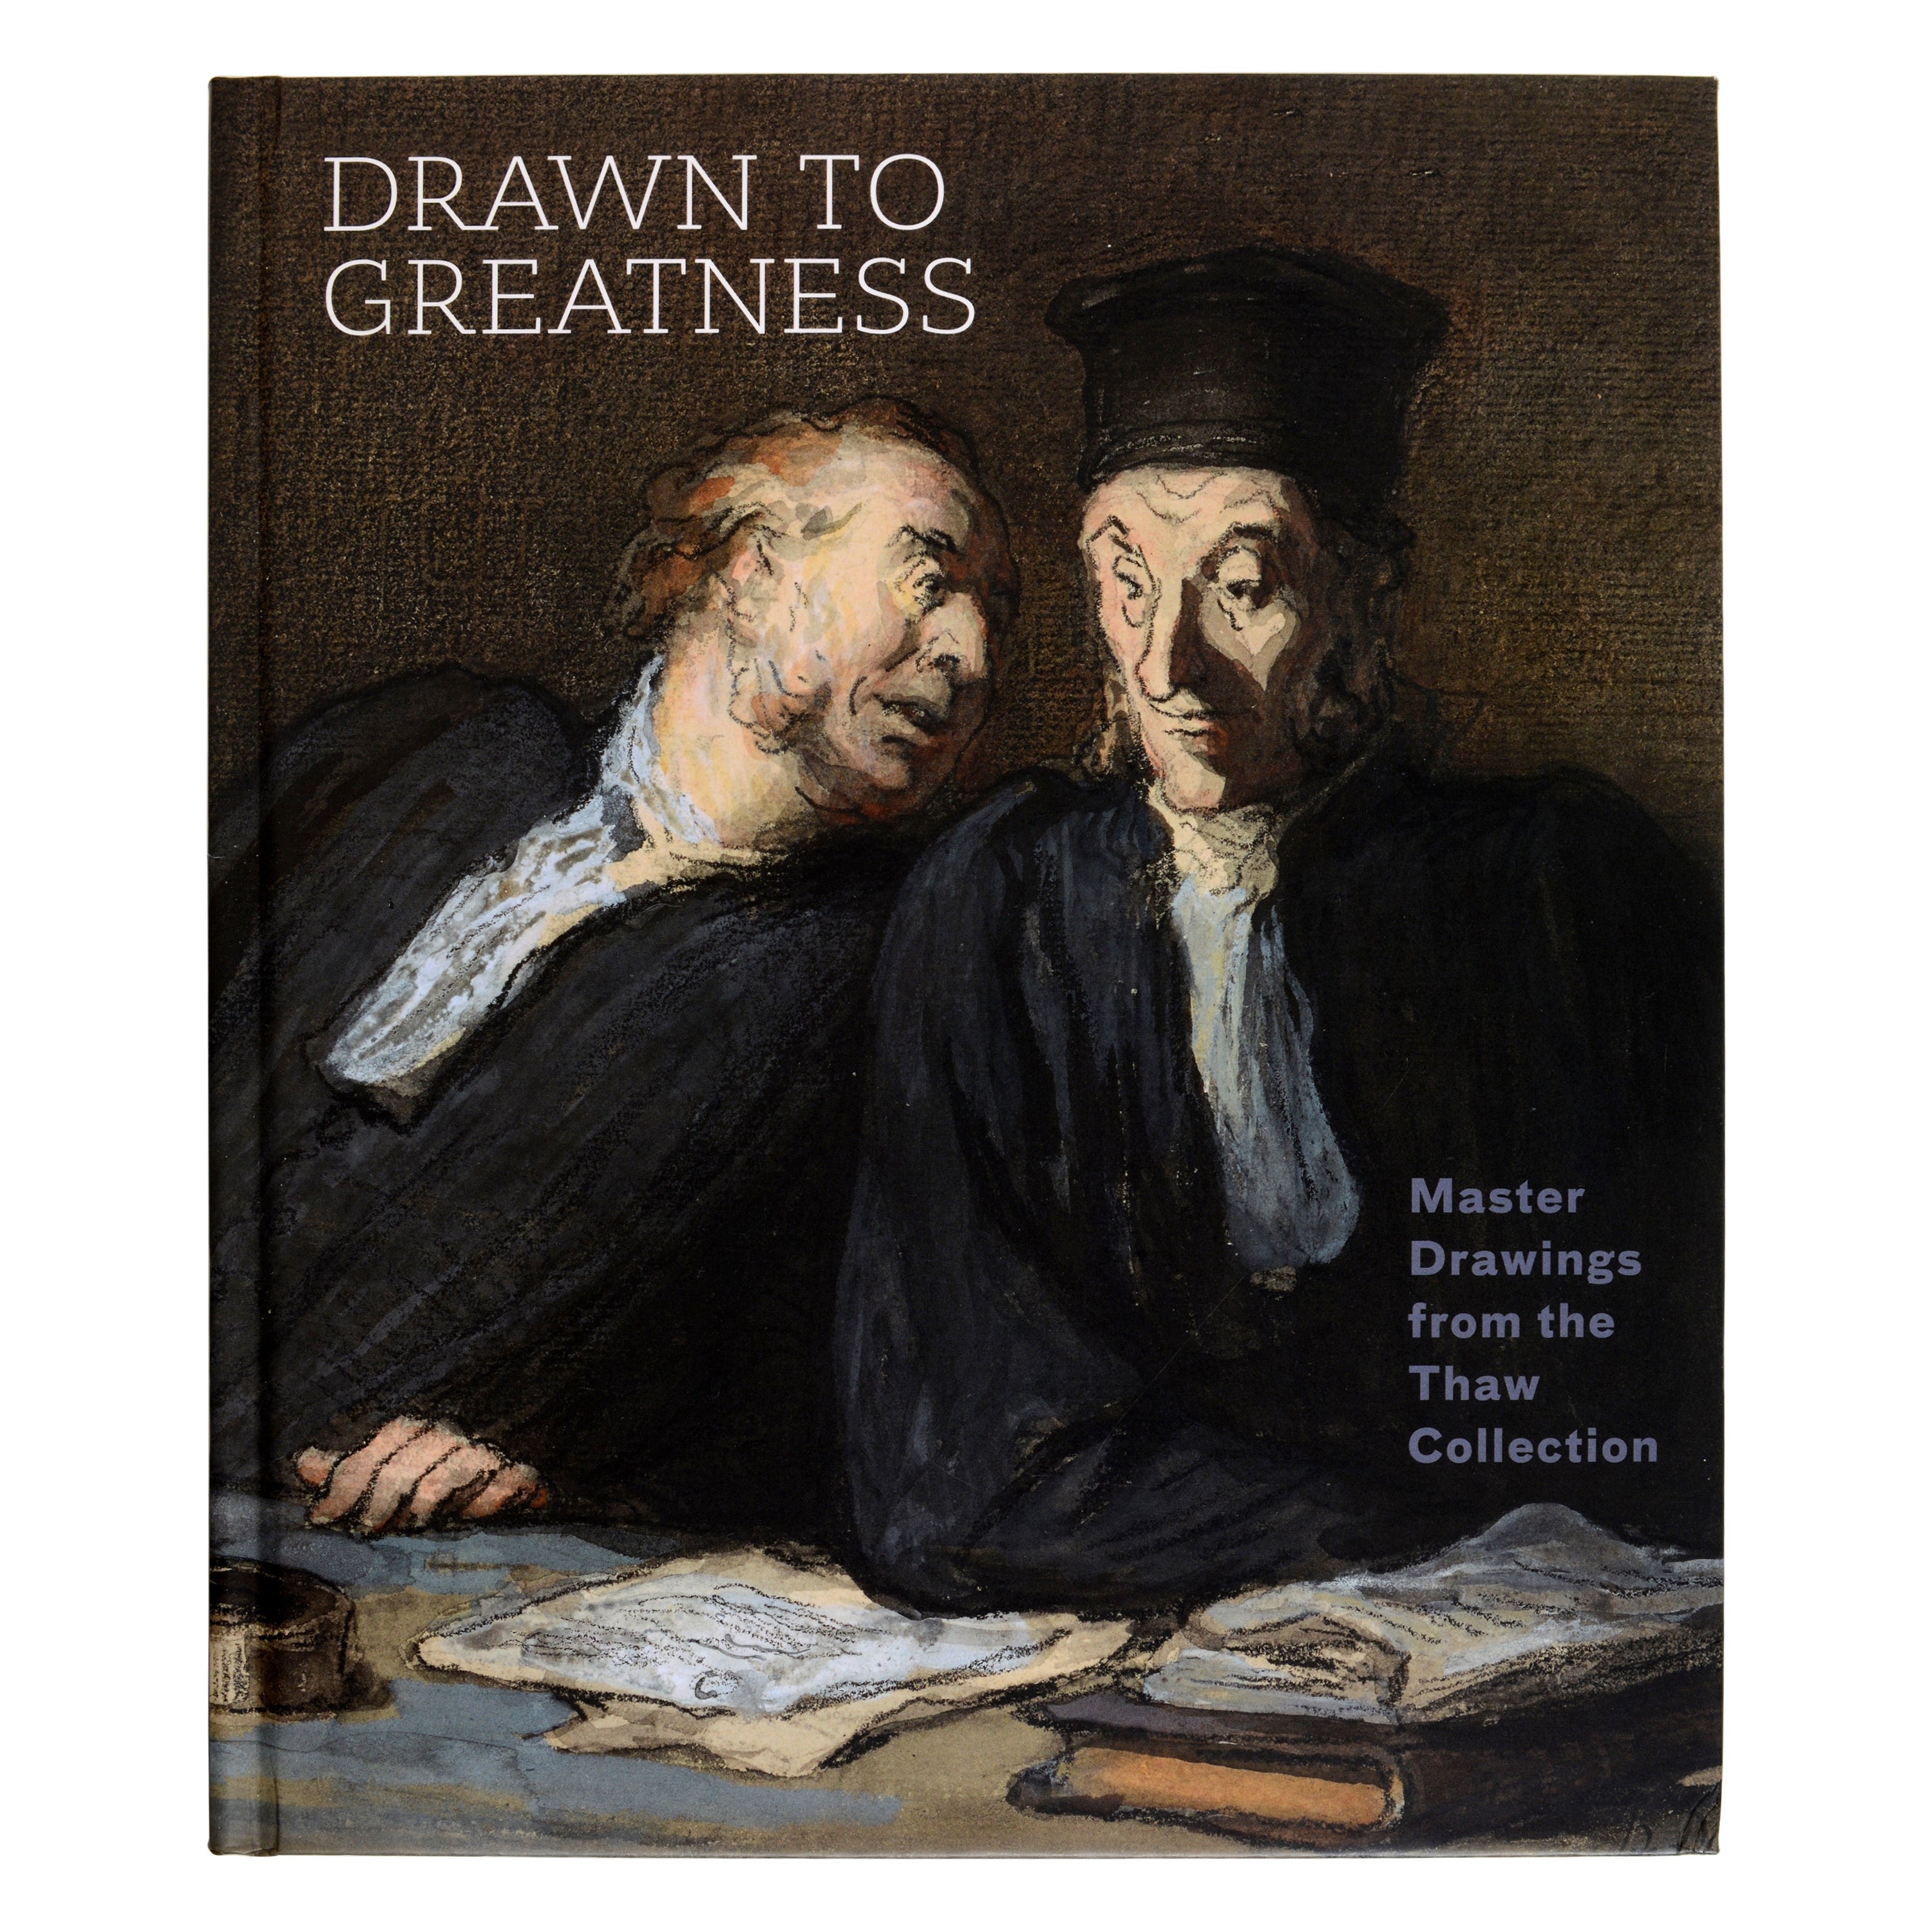 Drawn to Greatness: Master Drawings from the Thaw Collection de Pierpont Morgan en vente